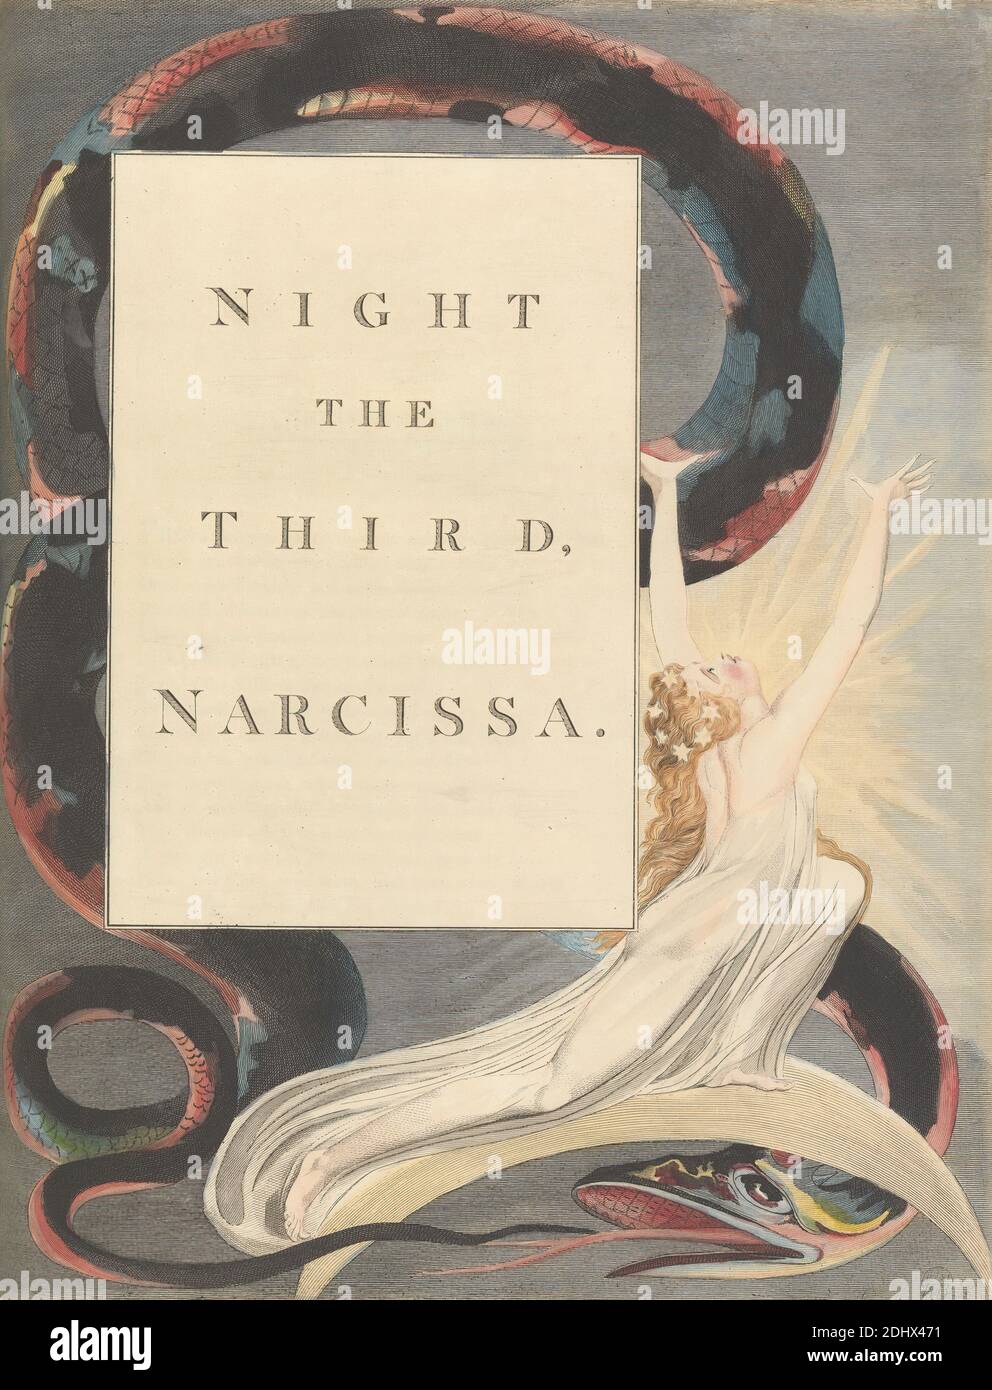 Young's Night Thoughts, Page 43, 'Night the Third, Narcissa.', Print made by William Blake, 1757–1827, British, ca. 1797, Etching and line engraving with watercolor on moderately thick, slightly textured, cream wove paper, Spine: 16 3/4 inches (42.5 cm), Sheet: 16 1/2 x 13 inches (41.9 x 33 cm), and Plate: 16 1/8 x 12 5/8 inches (41 x 32.1 cm), crowns, gown, literary theme, serpent, snake, stars, text, women Stock Photo